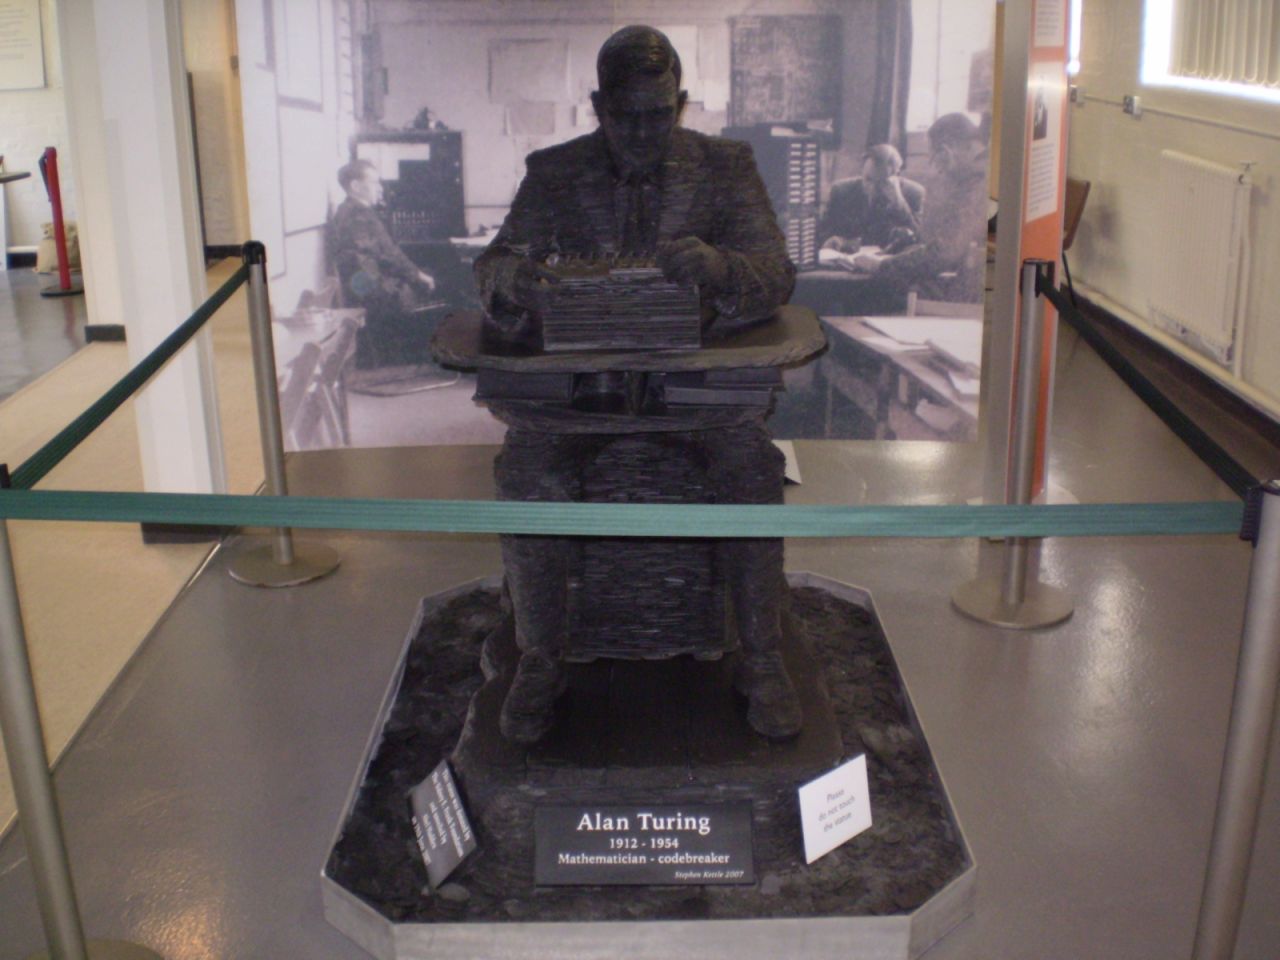 The Real Bletchley Park, Where Alan Turing Worked [Gallery]